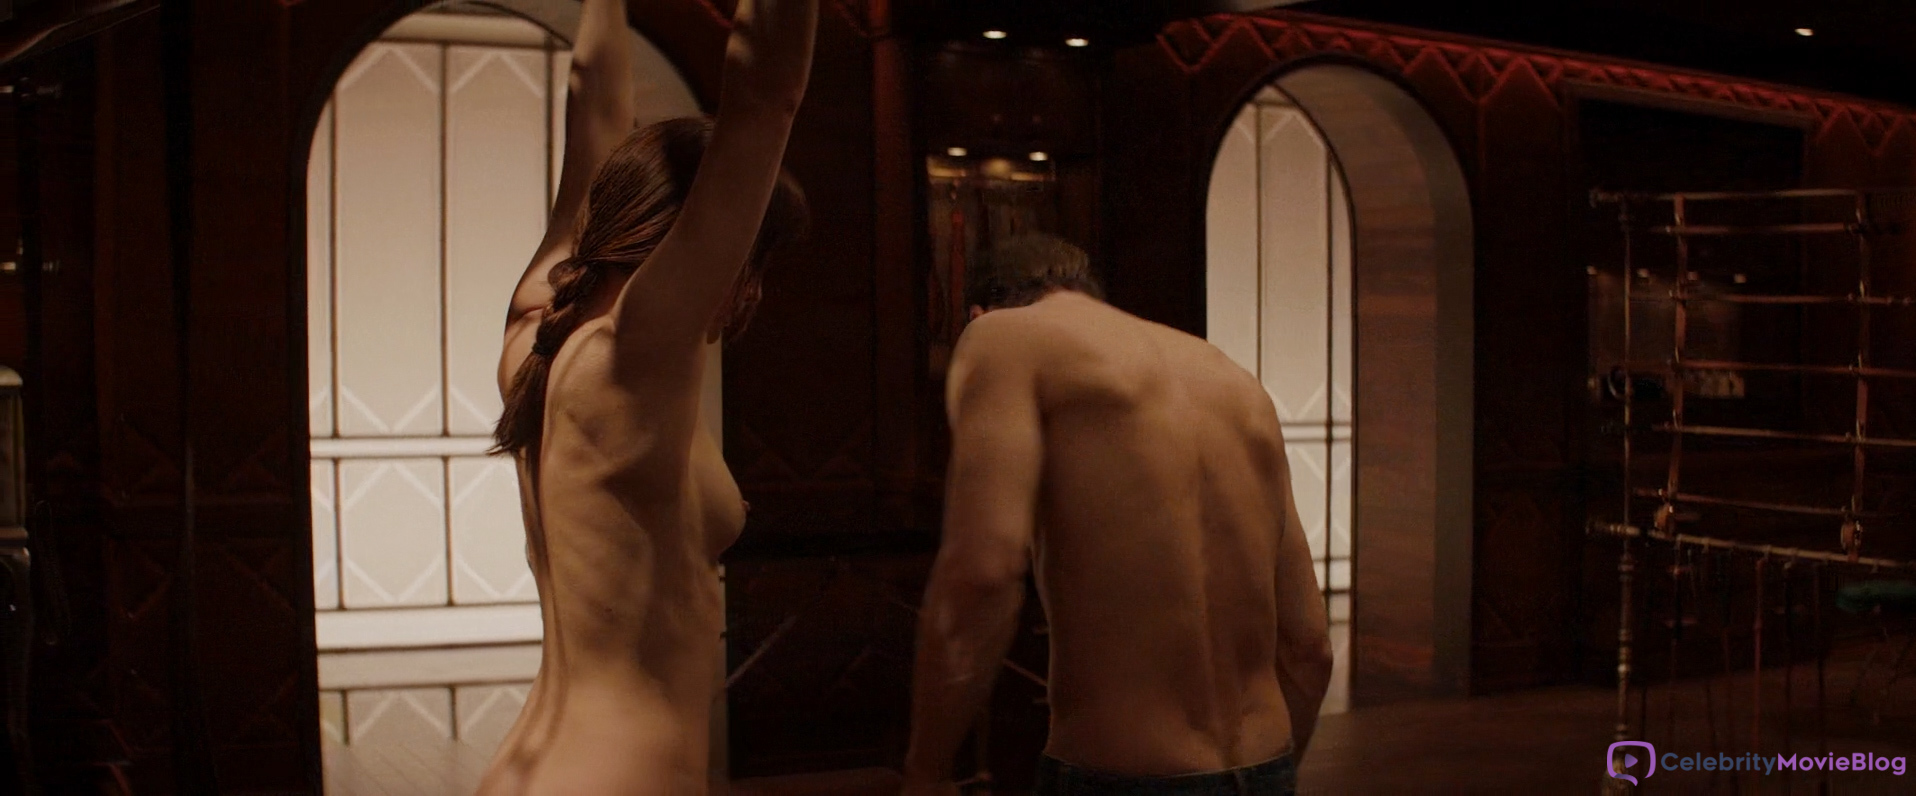 Fifty Shades of Gray with Dakota Johnson nude can spark everyone’s imaginat...